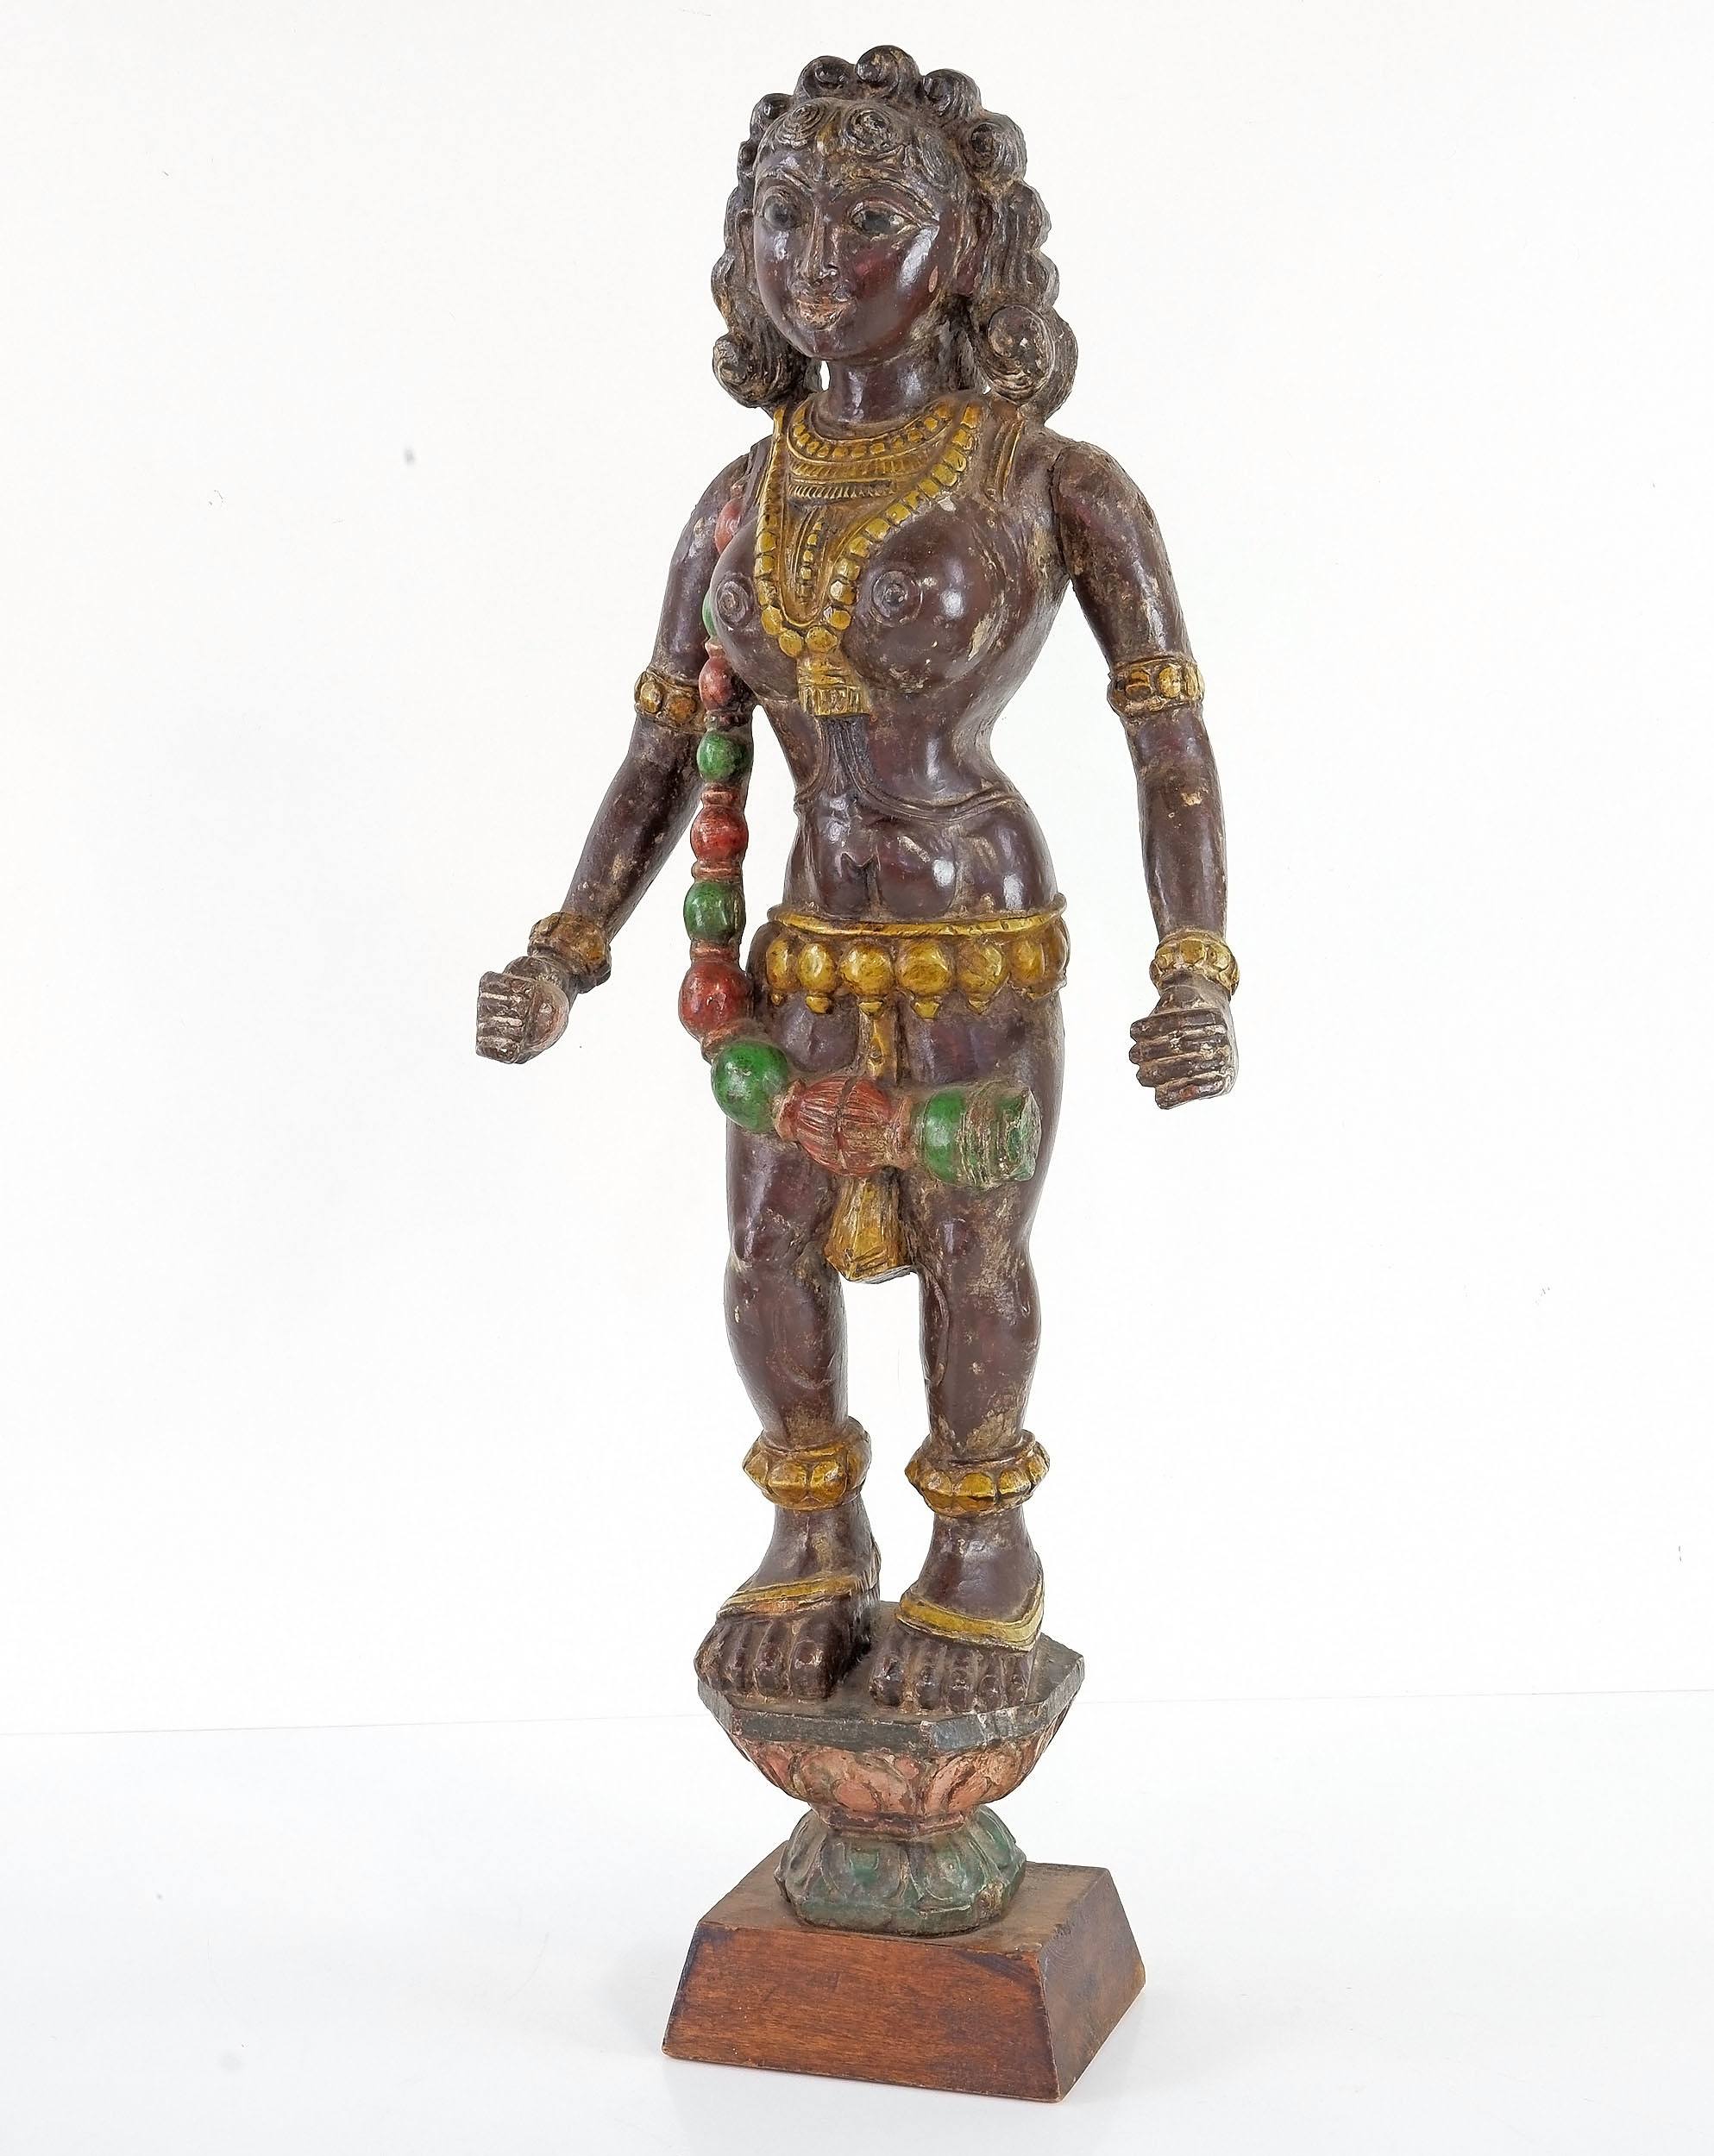 'Antique Indian Carved and Polychromed Wood Figure of the Ogress Putana'